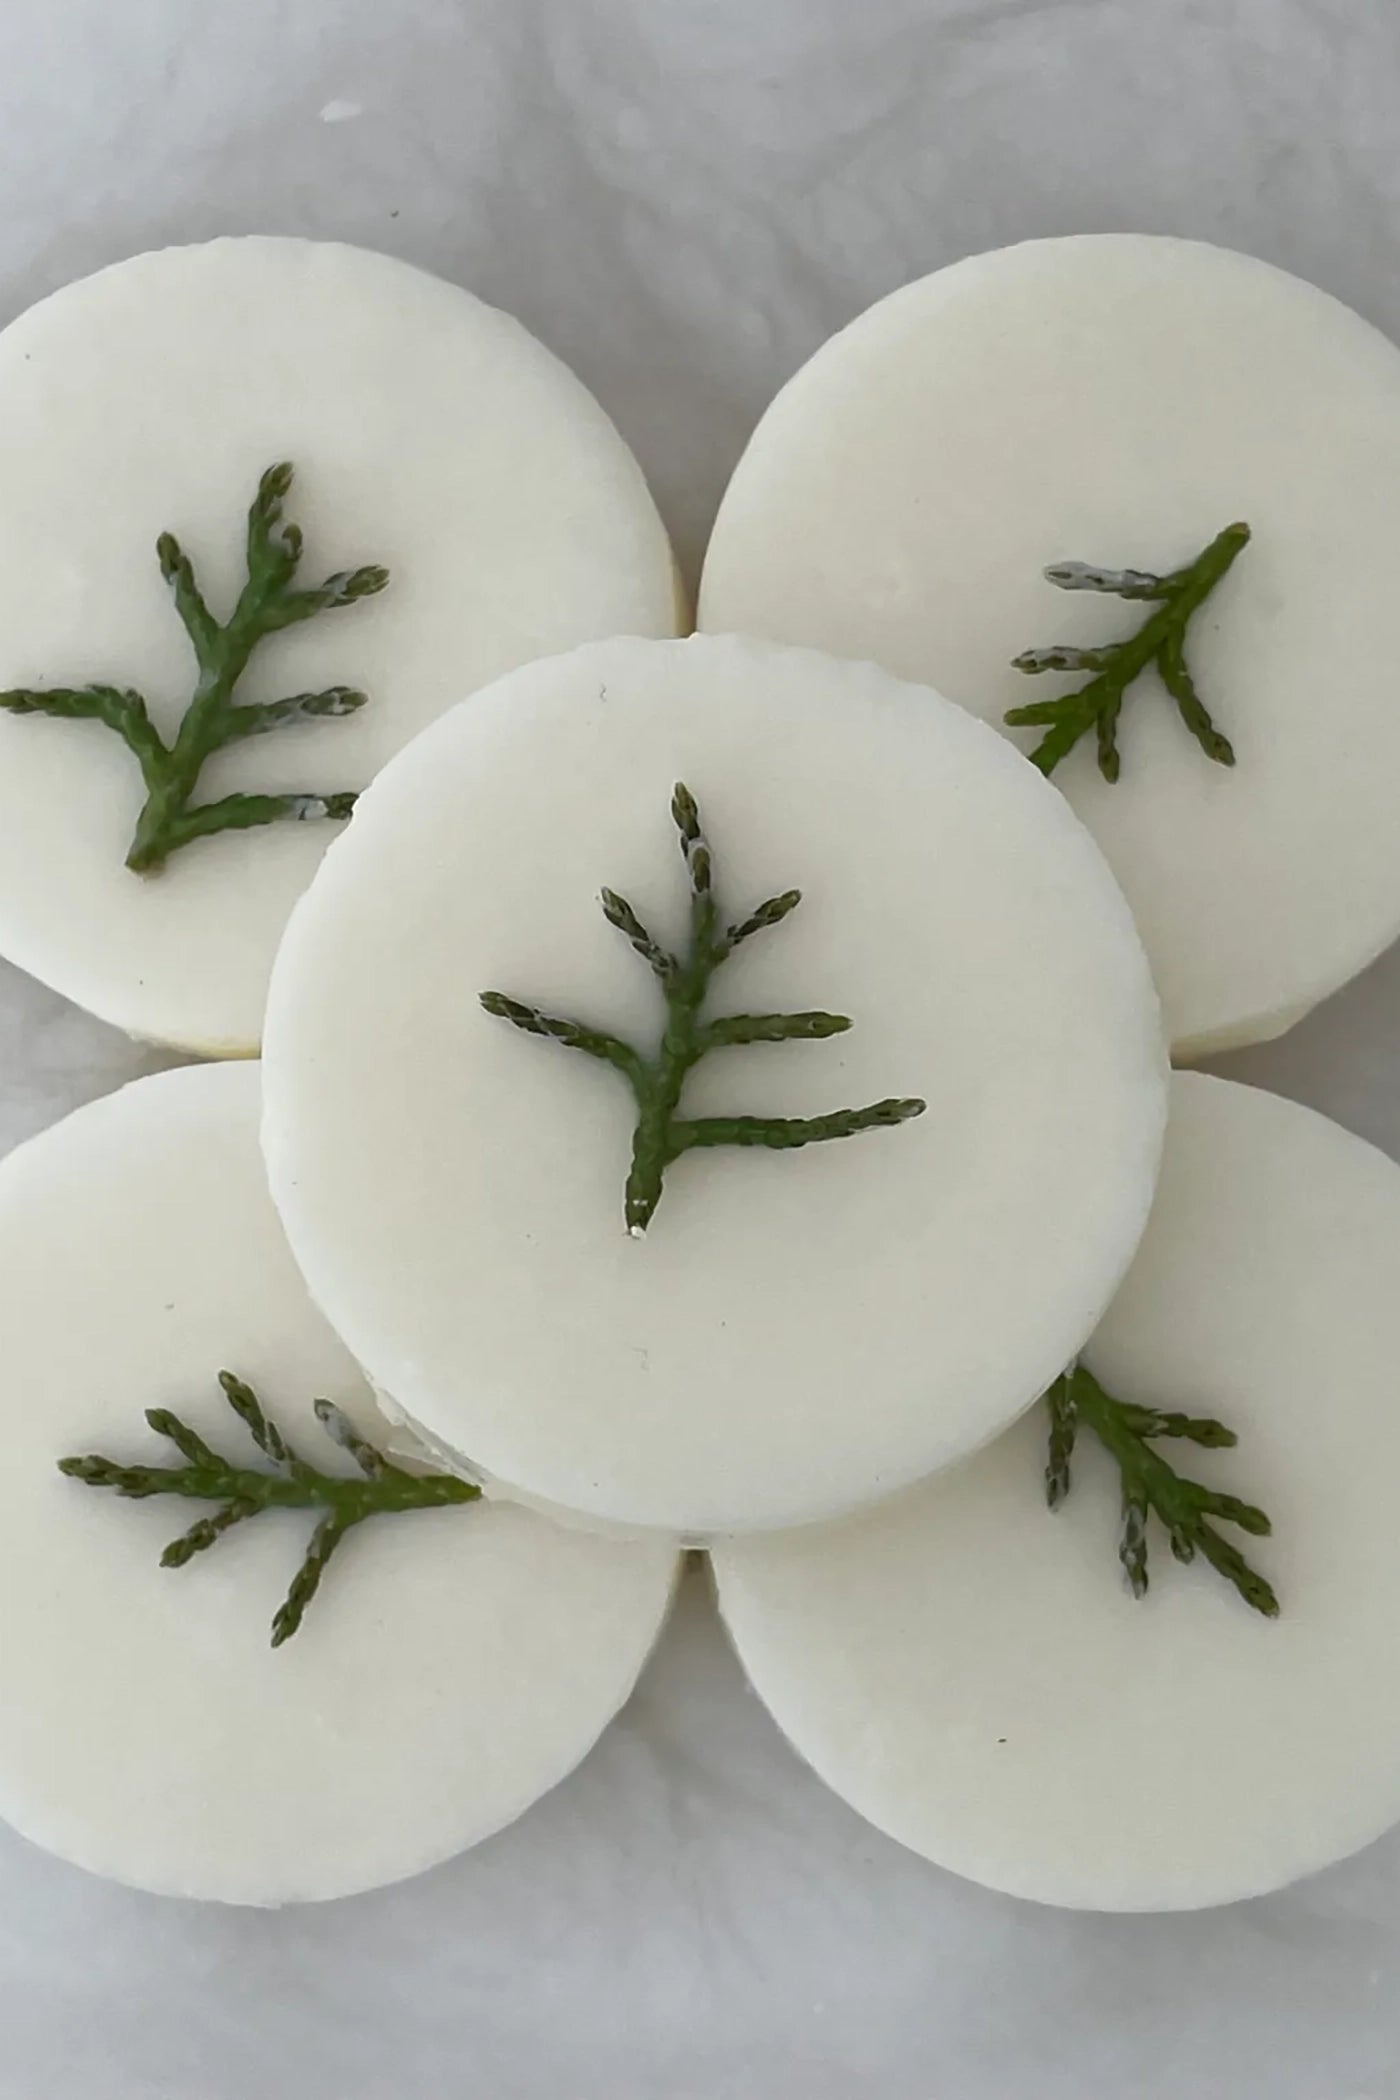 Multiple white wax melts with pieces from the scent profile in the wax.